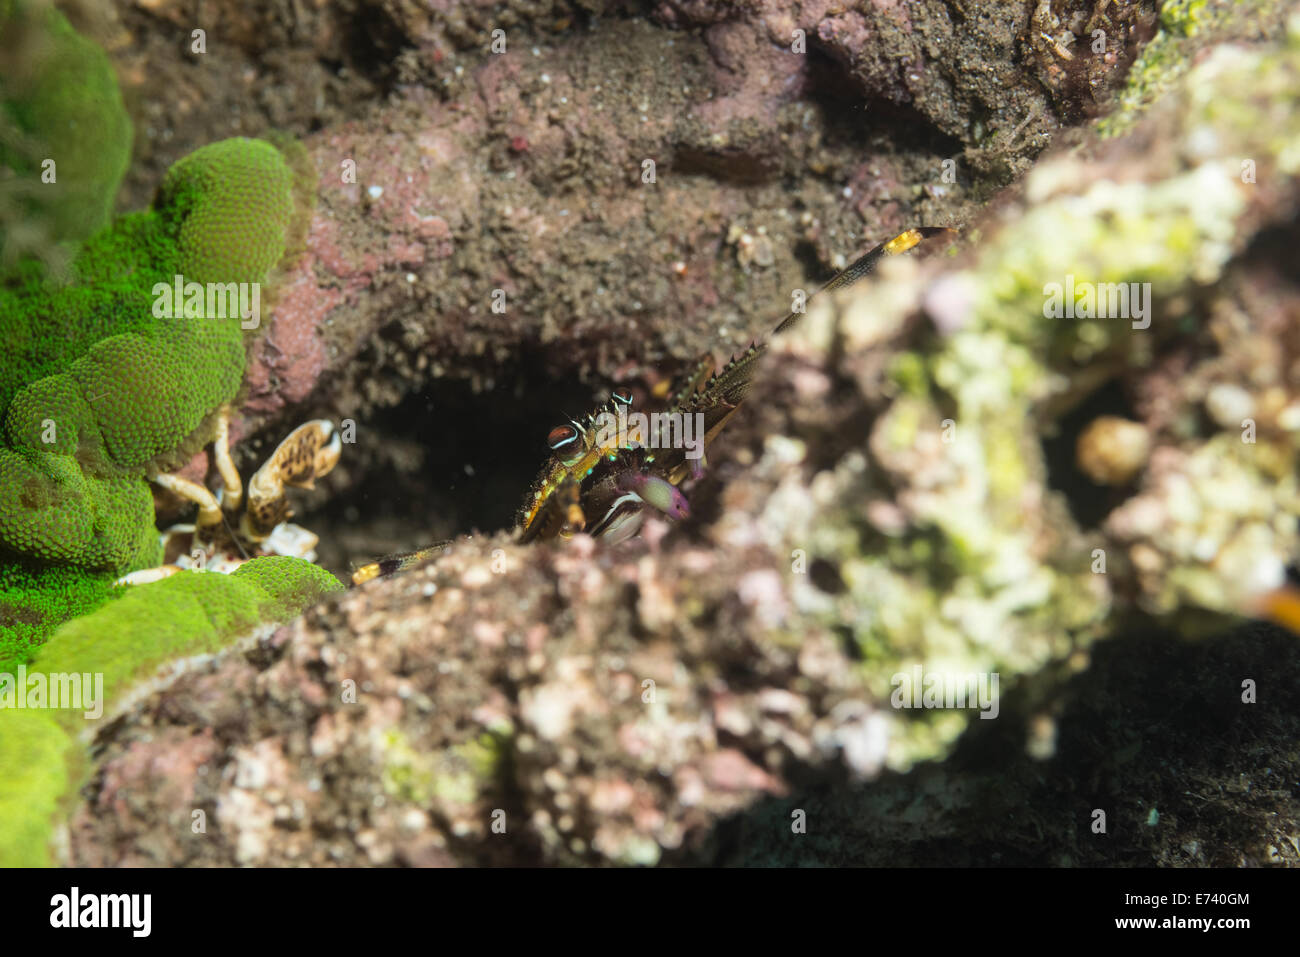 Flat rock crab on a coral Stock Photo